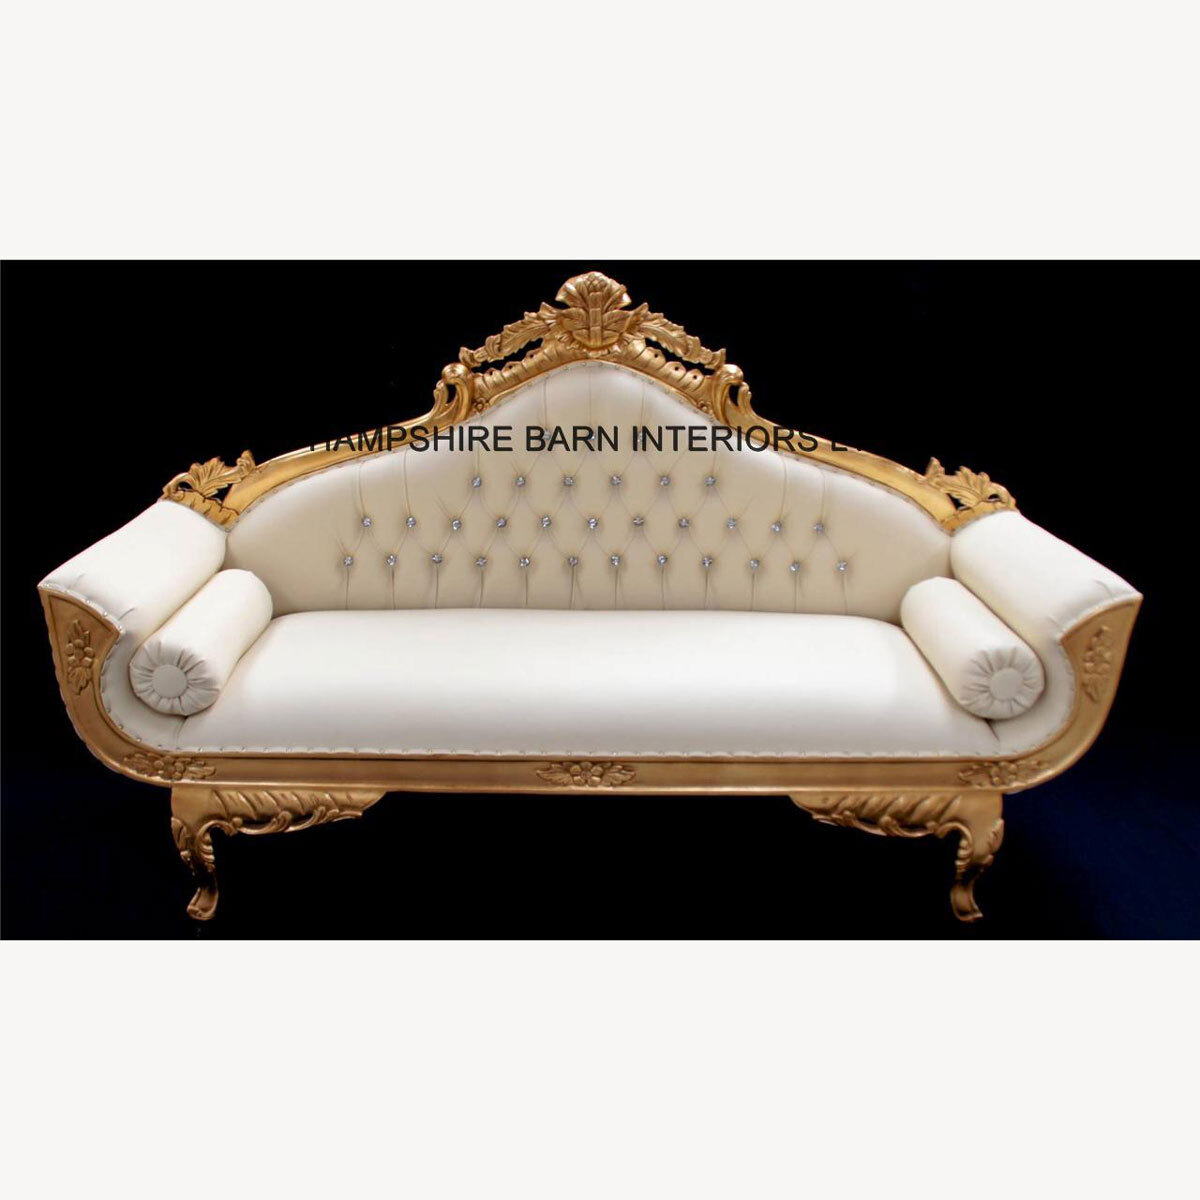 A Catherine Ornate Gold Royal Wedding 3 Piece Set Suite One Sofa And Two Chairs In Faux Cream Leat - Hampshire Barn Interiors - A Catherine Ornate Gold Royal Wedding 3 Piece Set / Suite (One Sofa And Two Chairs) In Faux Cream Leather With Diamond Crystal Buttons -